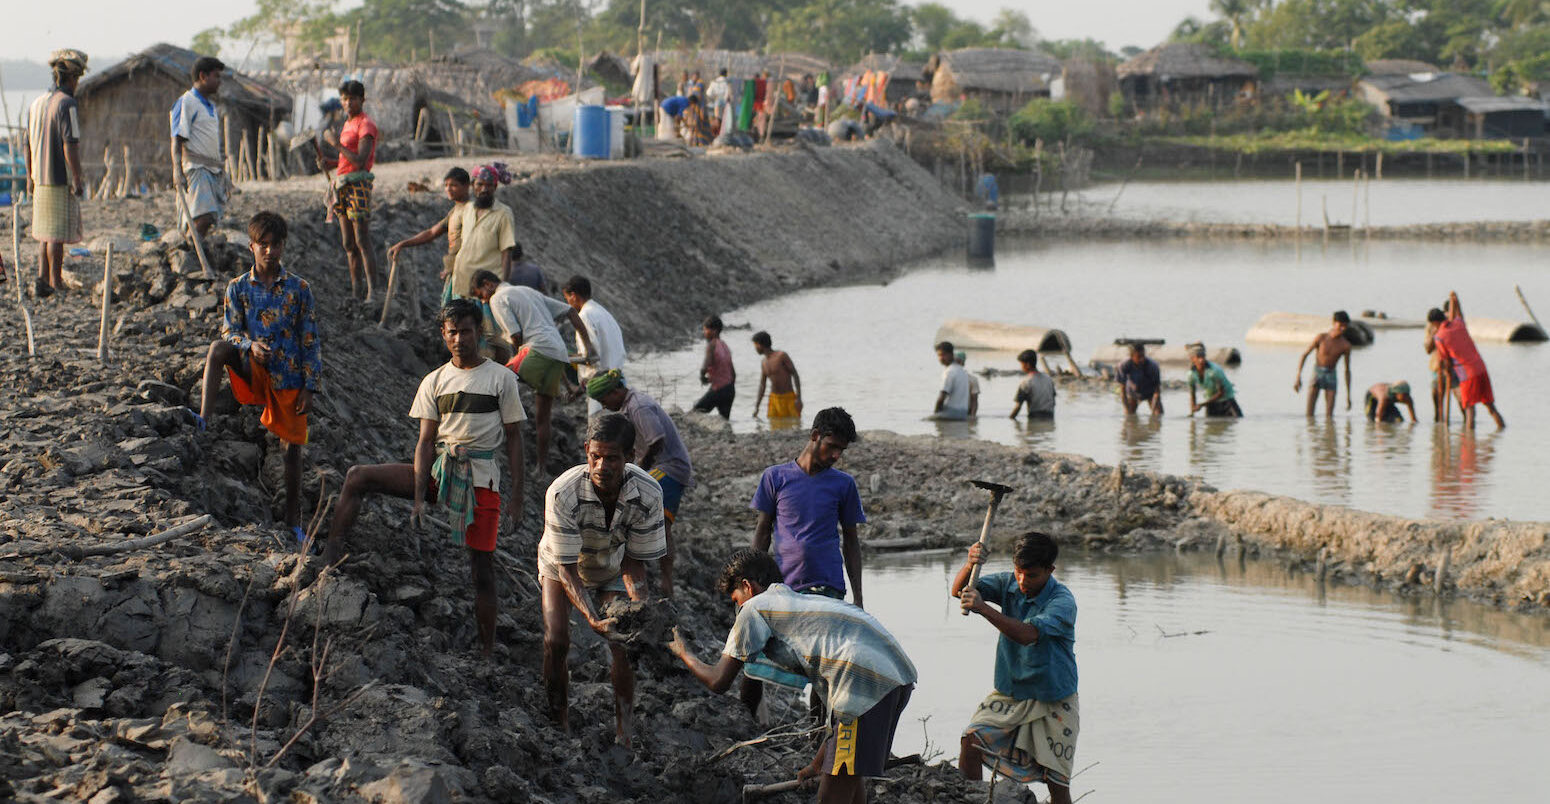 People repairing flood defence in a village in Bangladesh near the bay of Bengal.